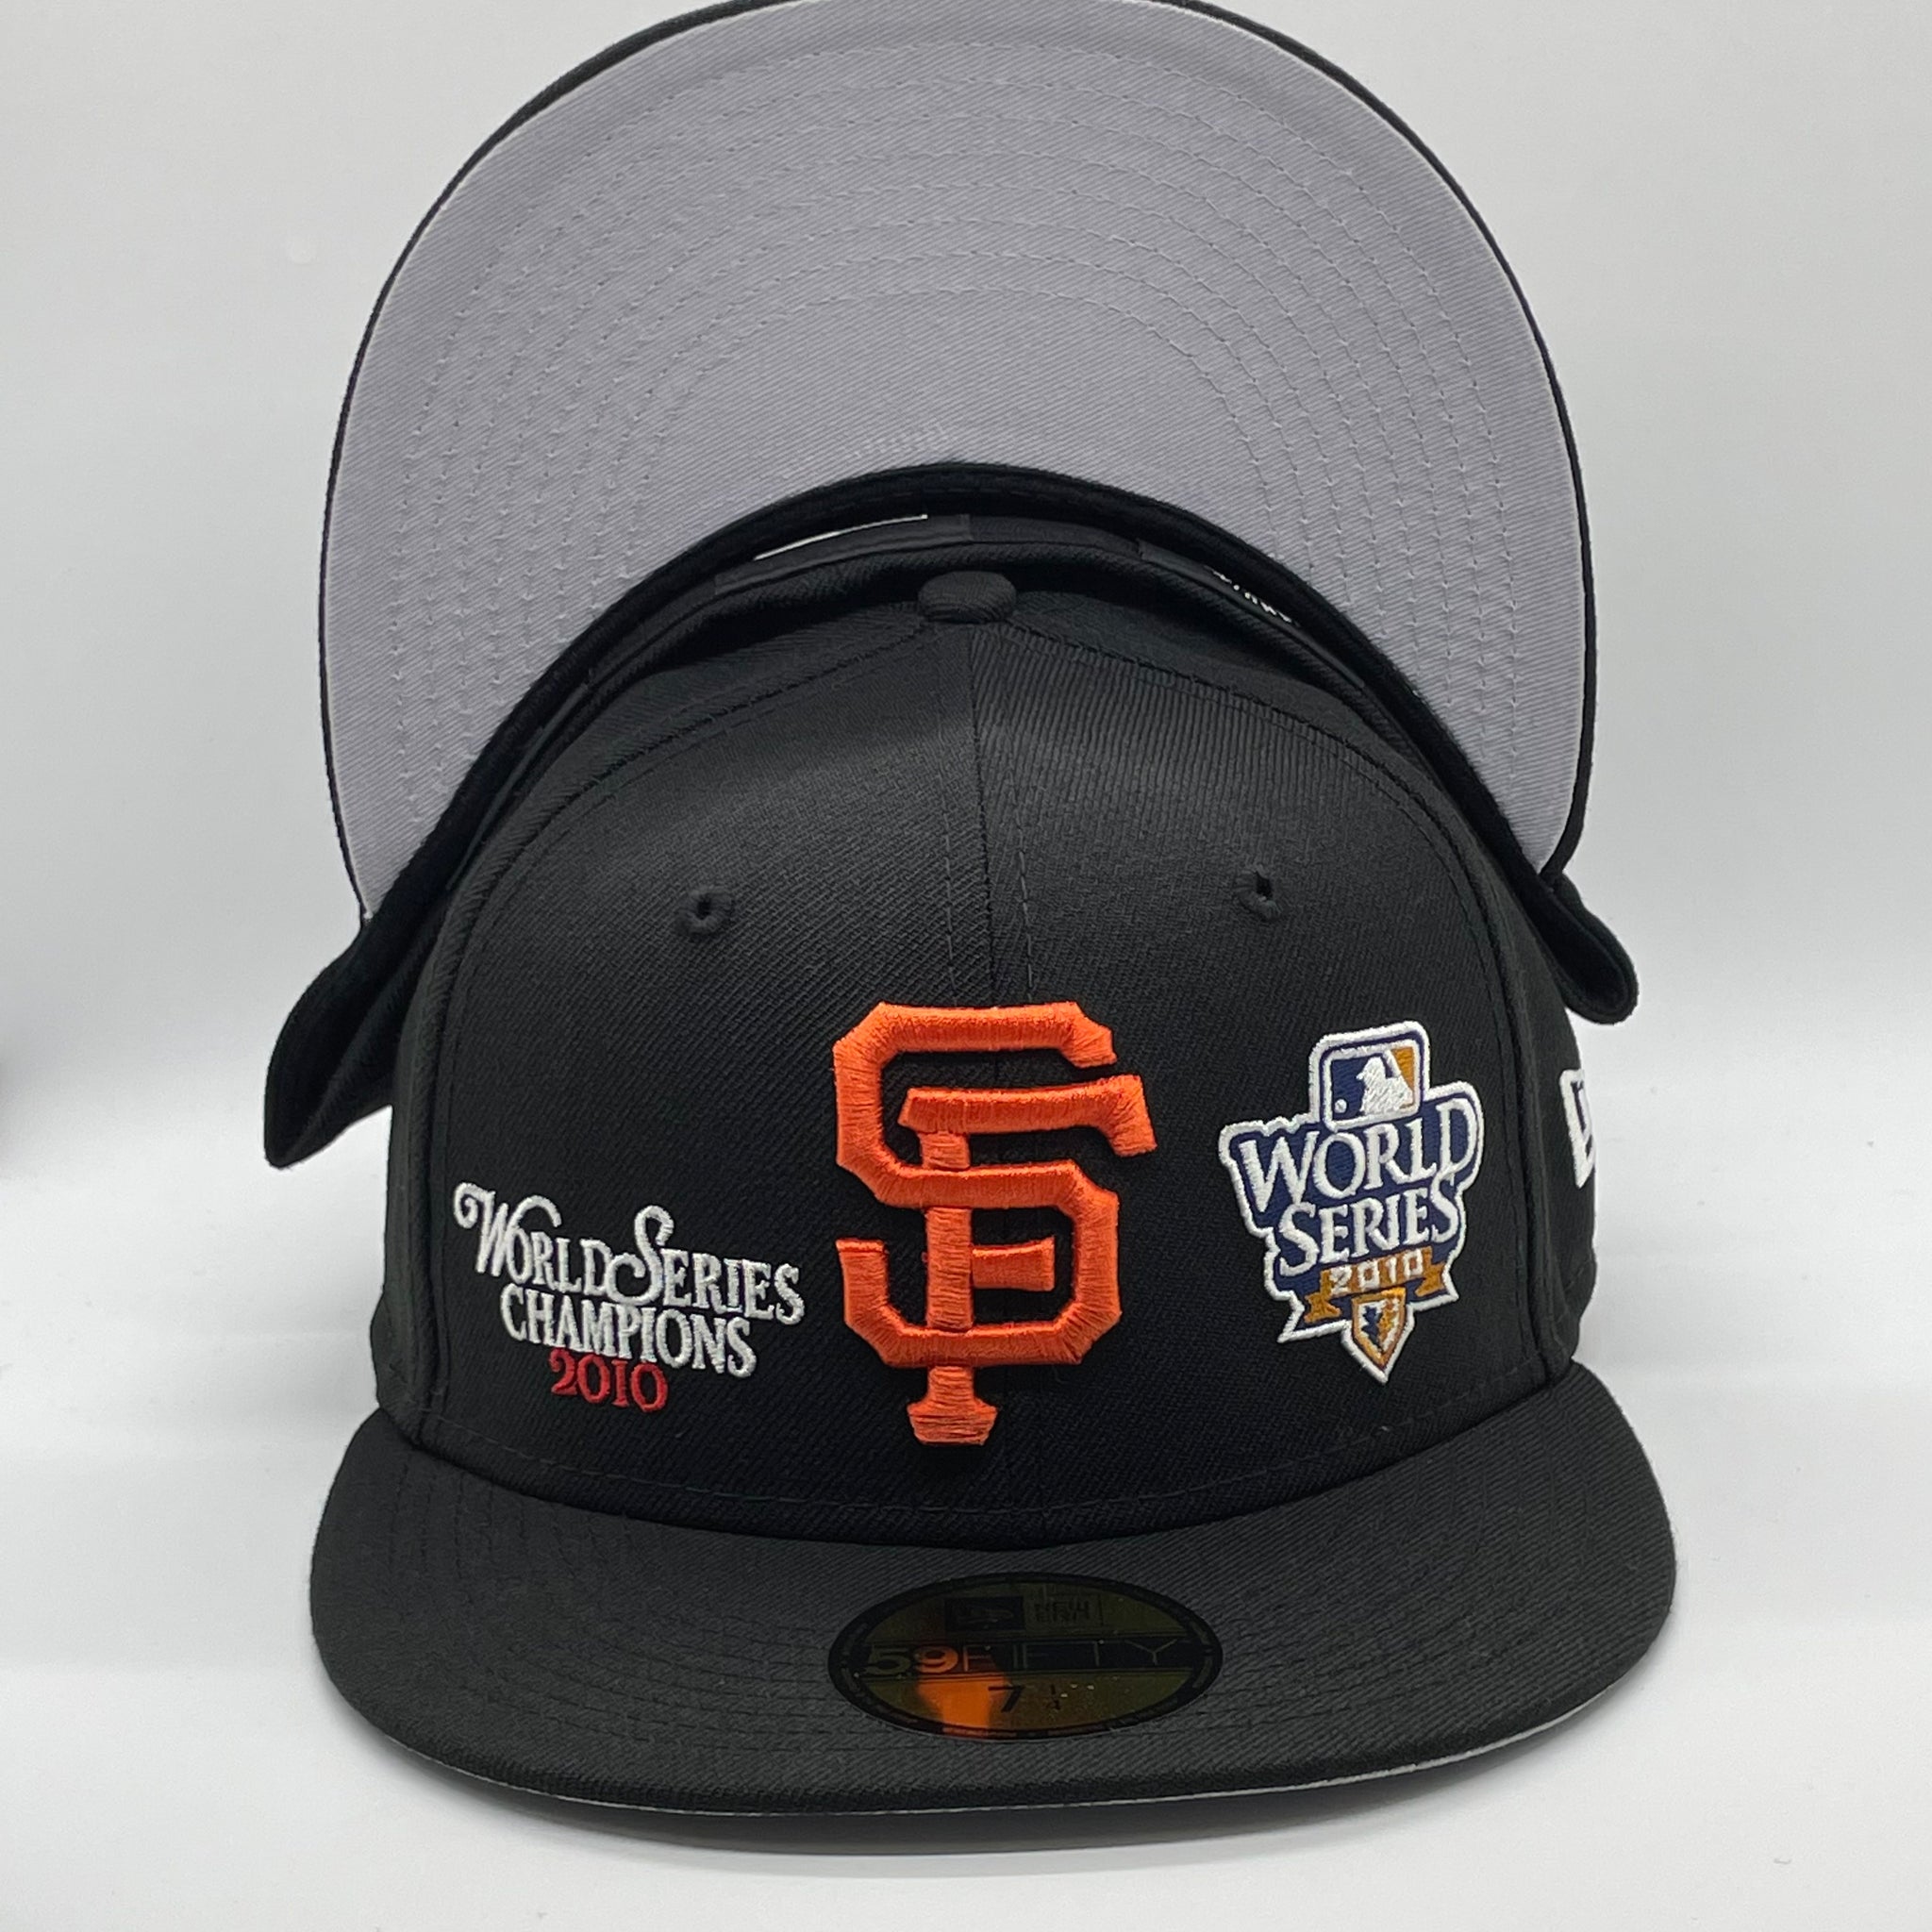 San Francisco Giants New Era Cooperstown Collection 2010 World